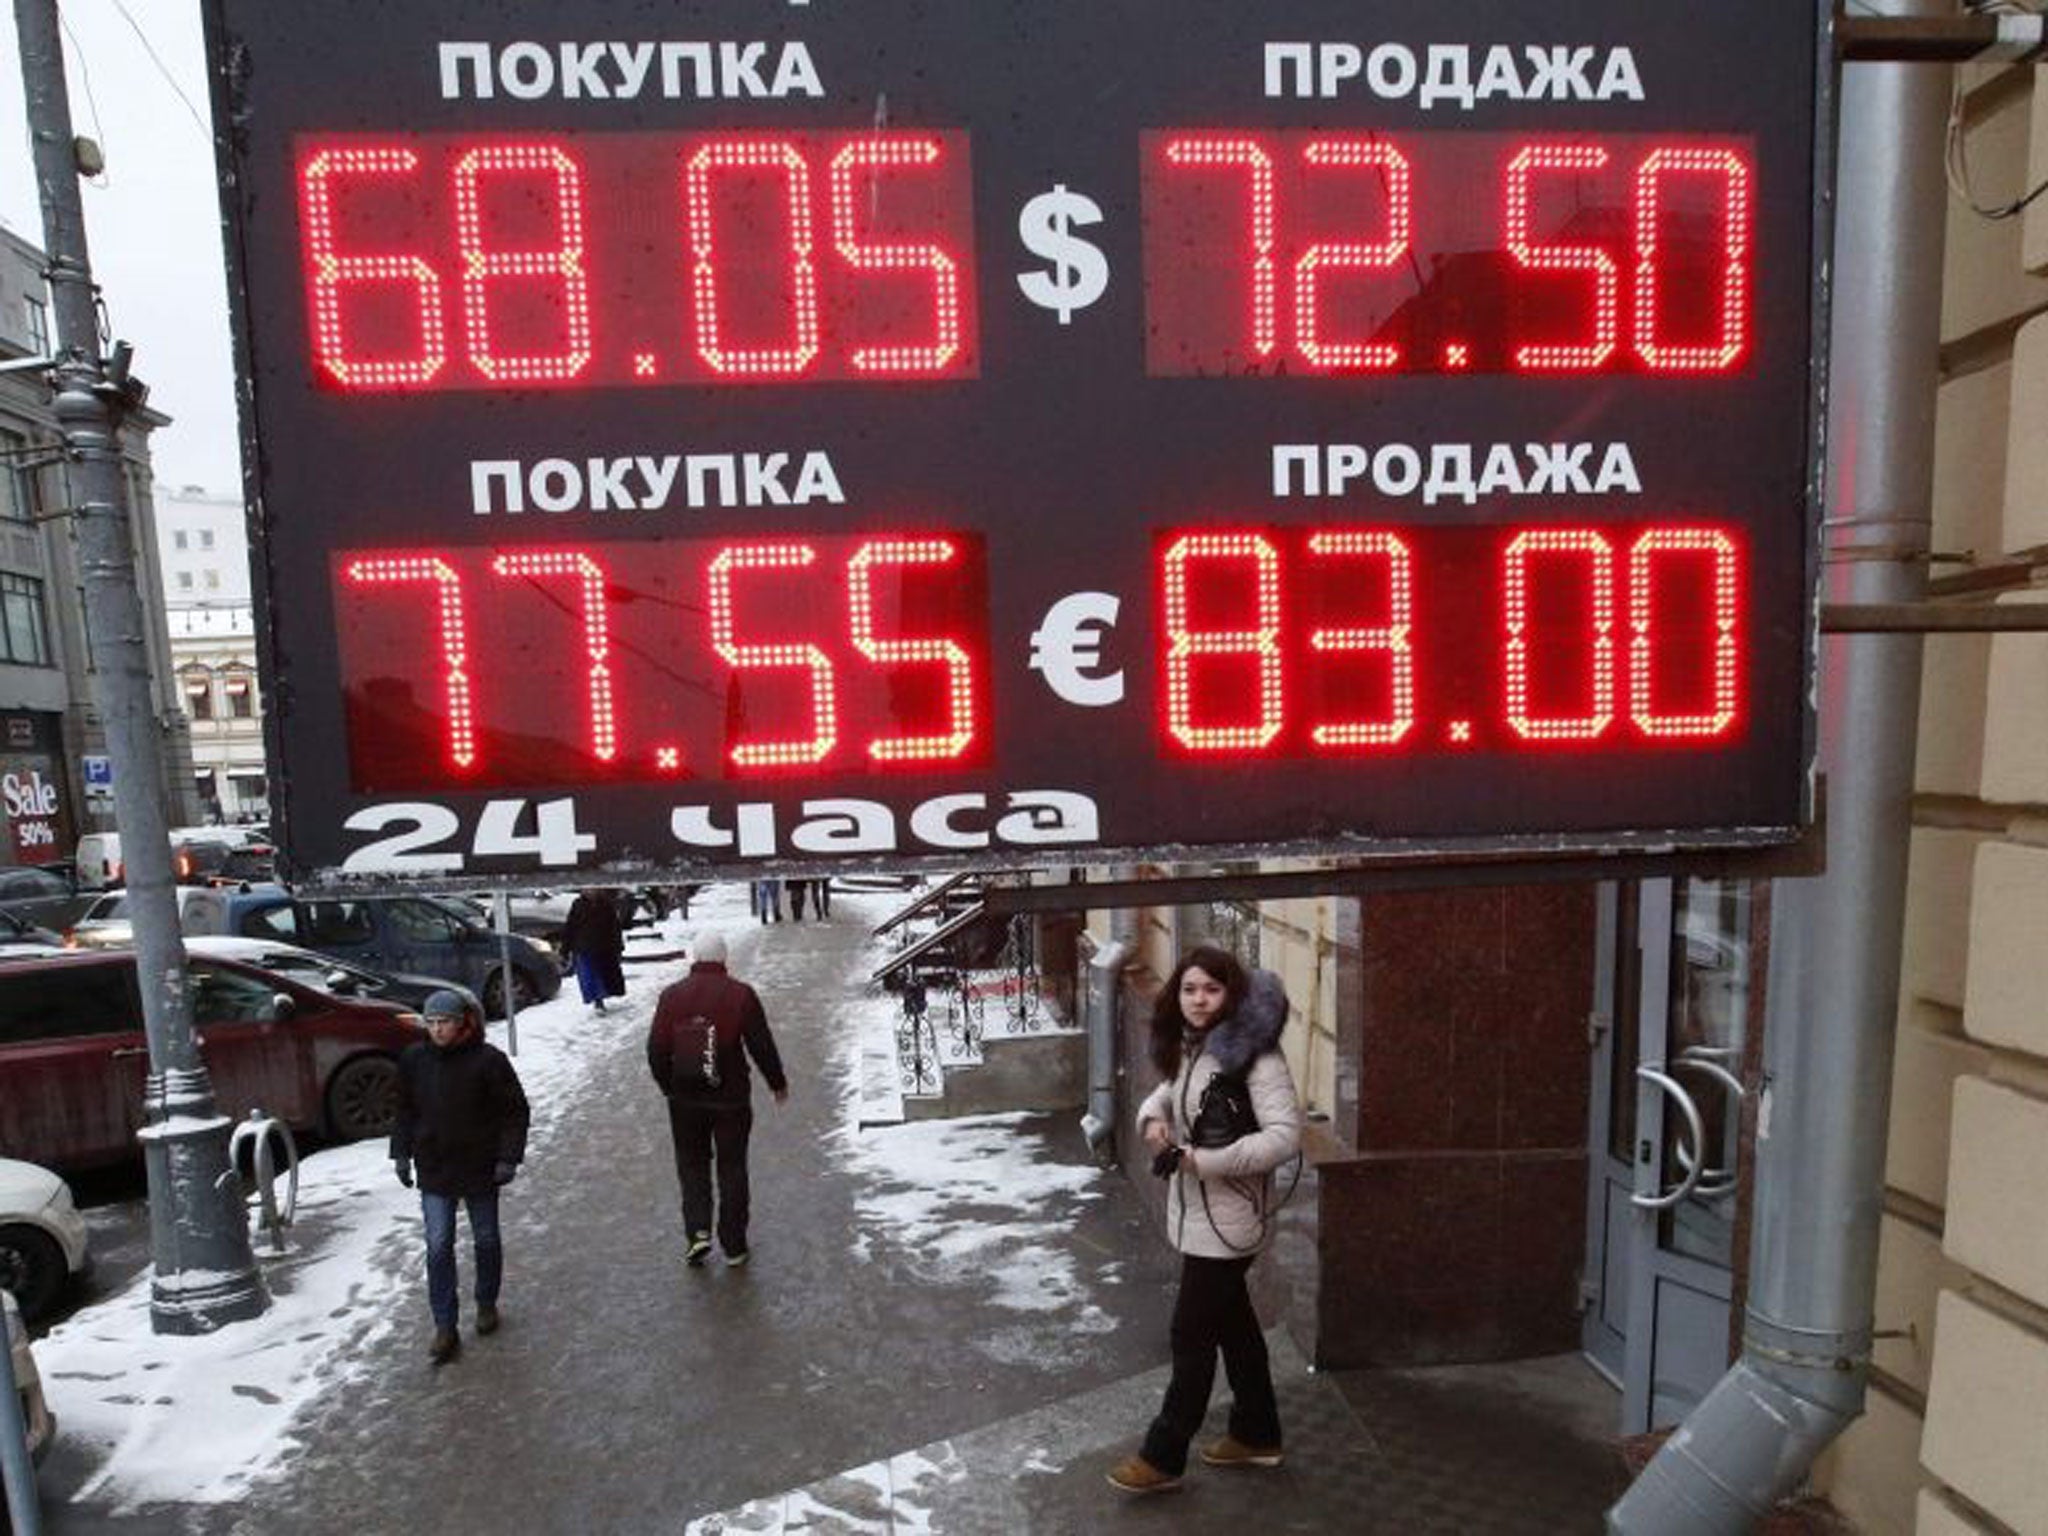 A board showing currency exchange rates is on display in central Moscow on 30 January, 2015